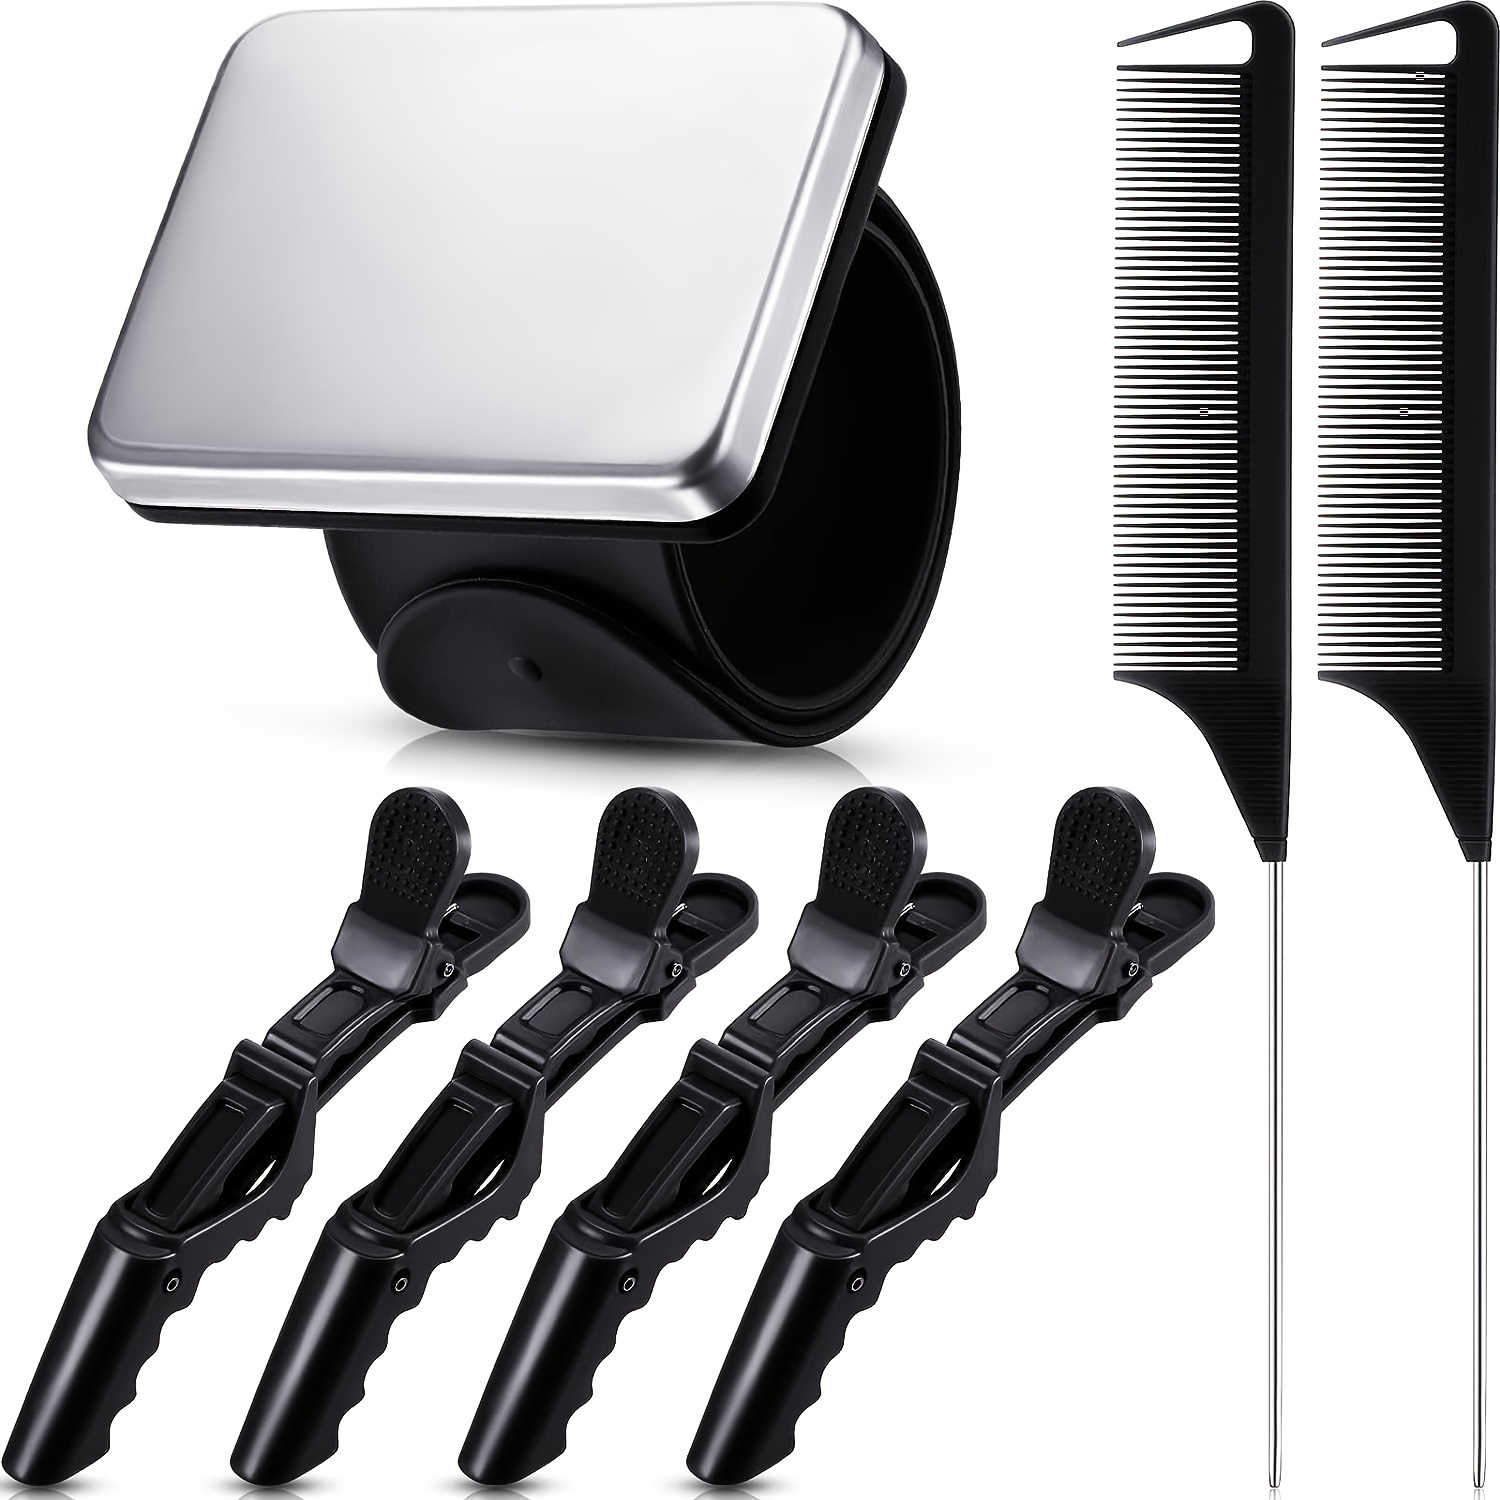 9 Pcs Hair Parting Comb Rat Tail Comb Set- 2 Pieces Braiding Comb Styling Comb 1 Fine and Wide Tooth Comb and Magnetic Wrist Sewing Pincushion Pin